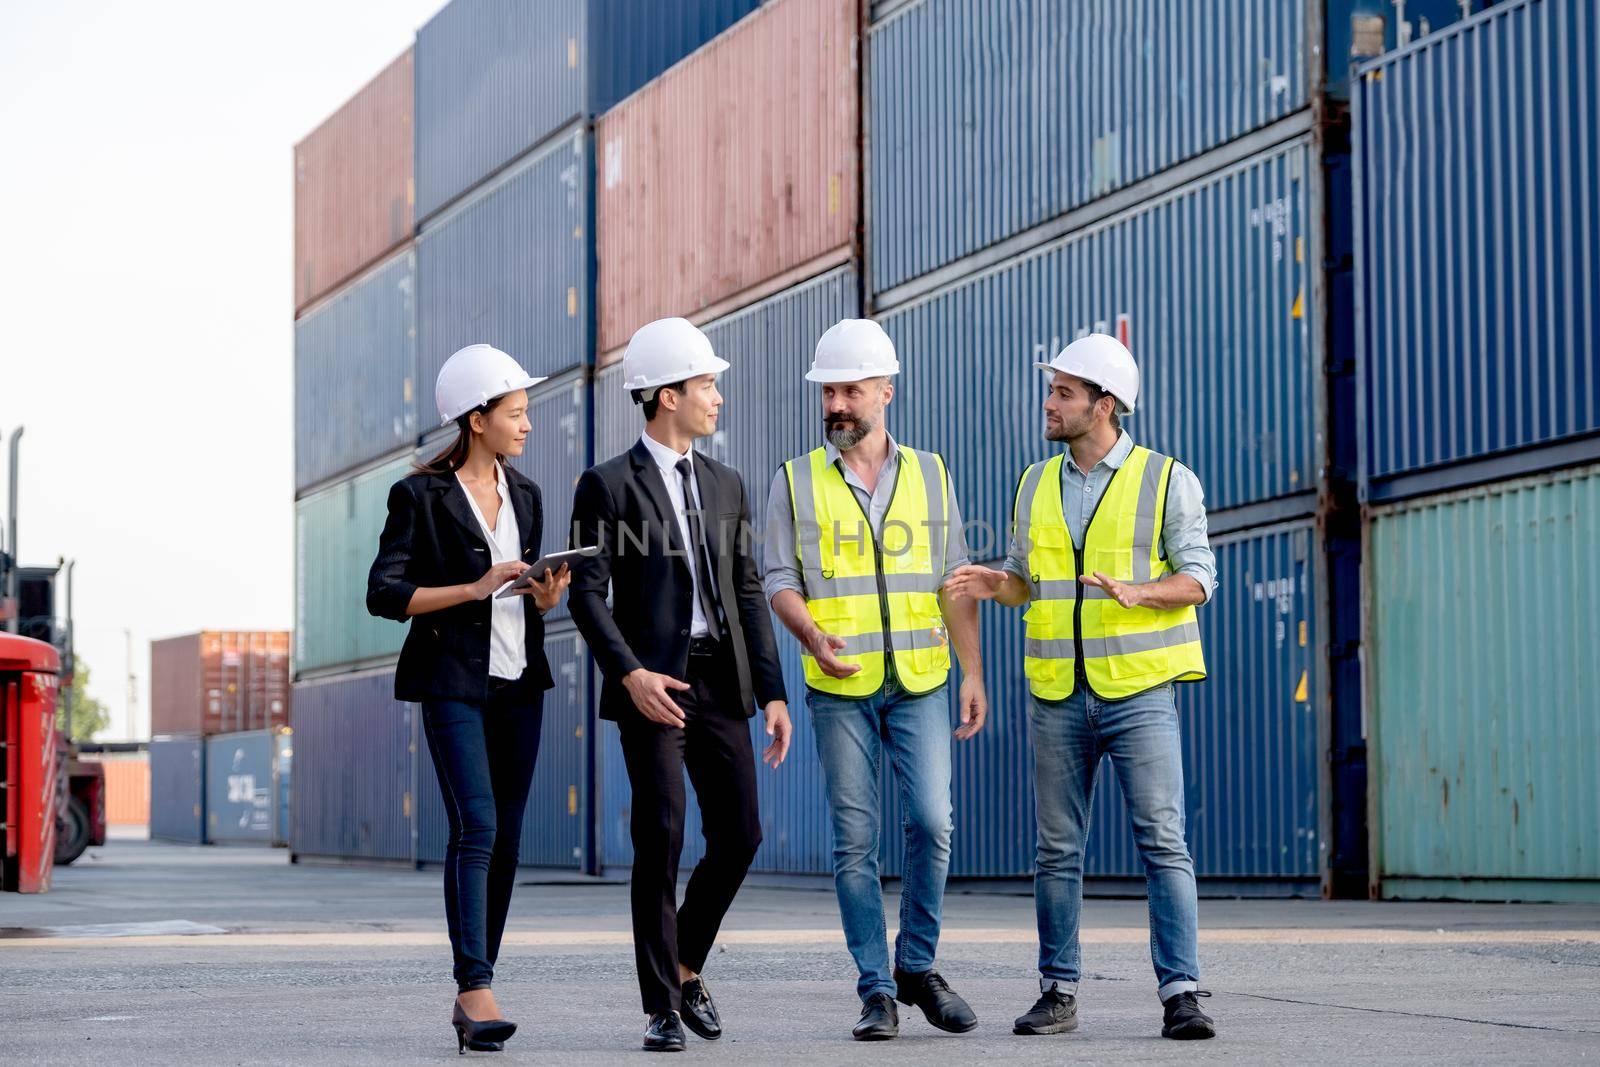 Group of cargo container workers or factory and engineer technicians walk and discuss together in workplace area. Concept of good teamwork support best success work of industrial business. by nrradmin